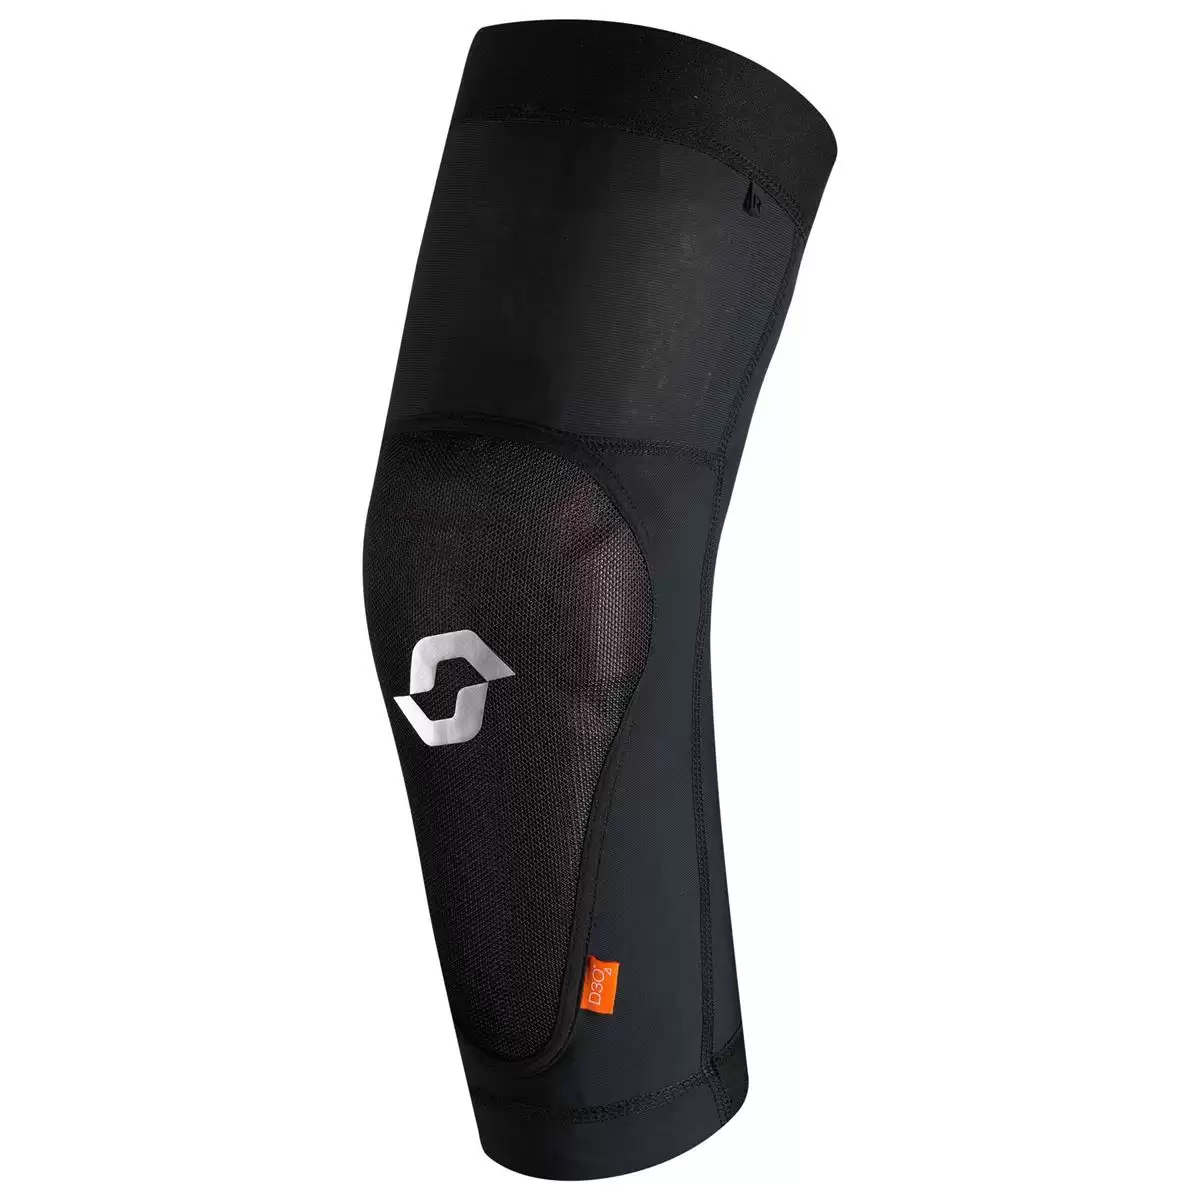 Elbow guards Softcon 2 Black/Grey - Size S - image